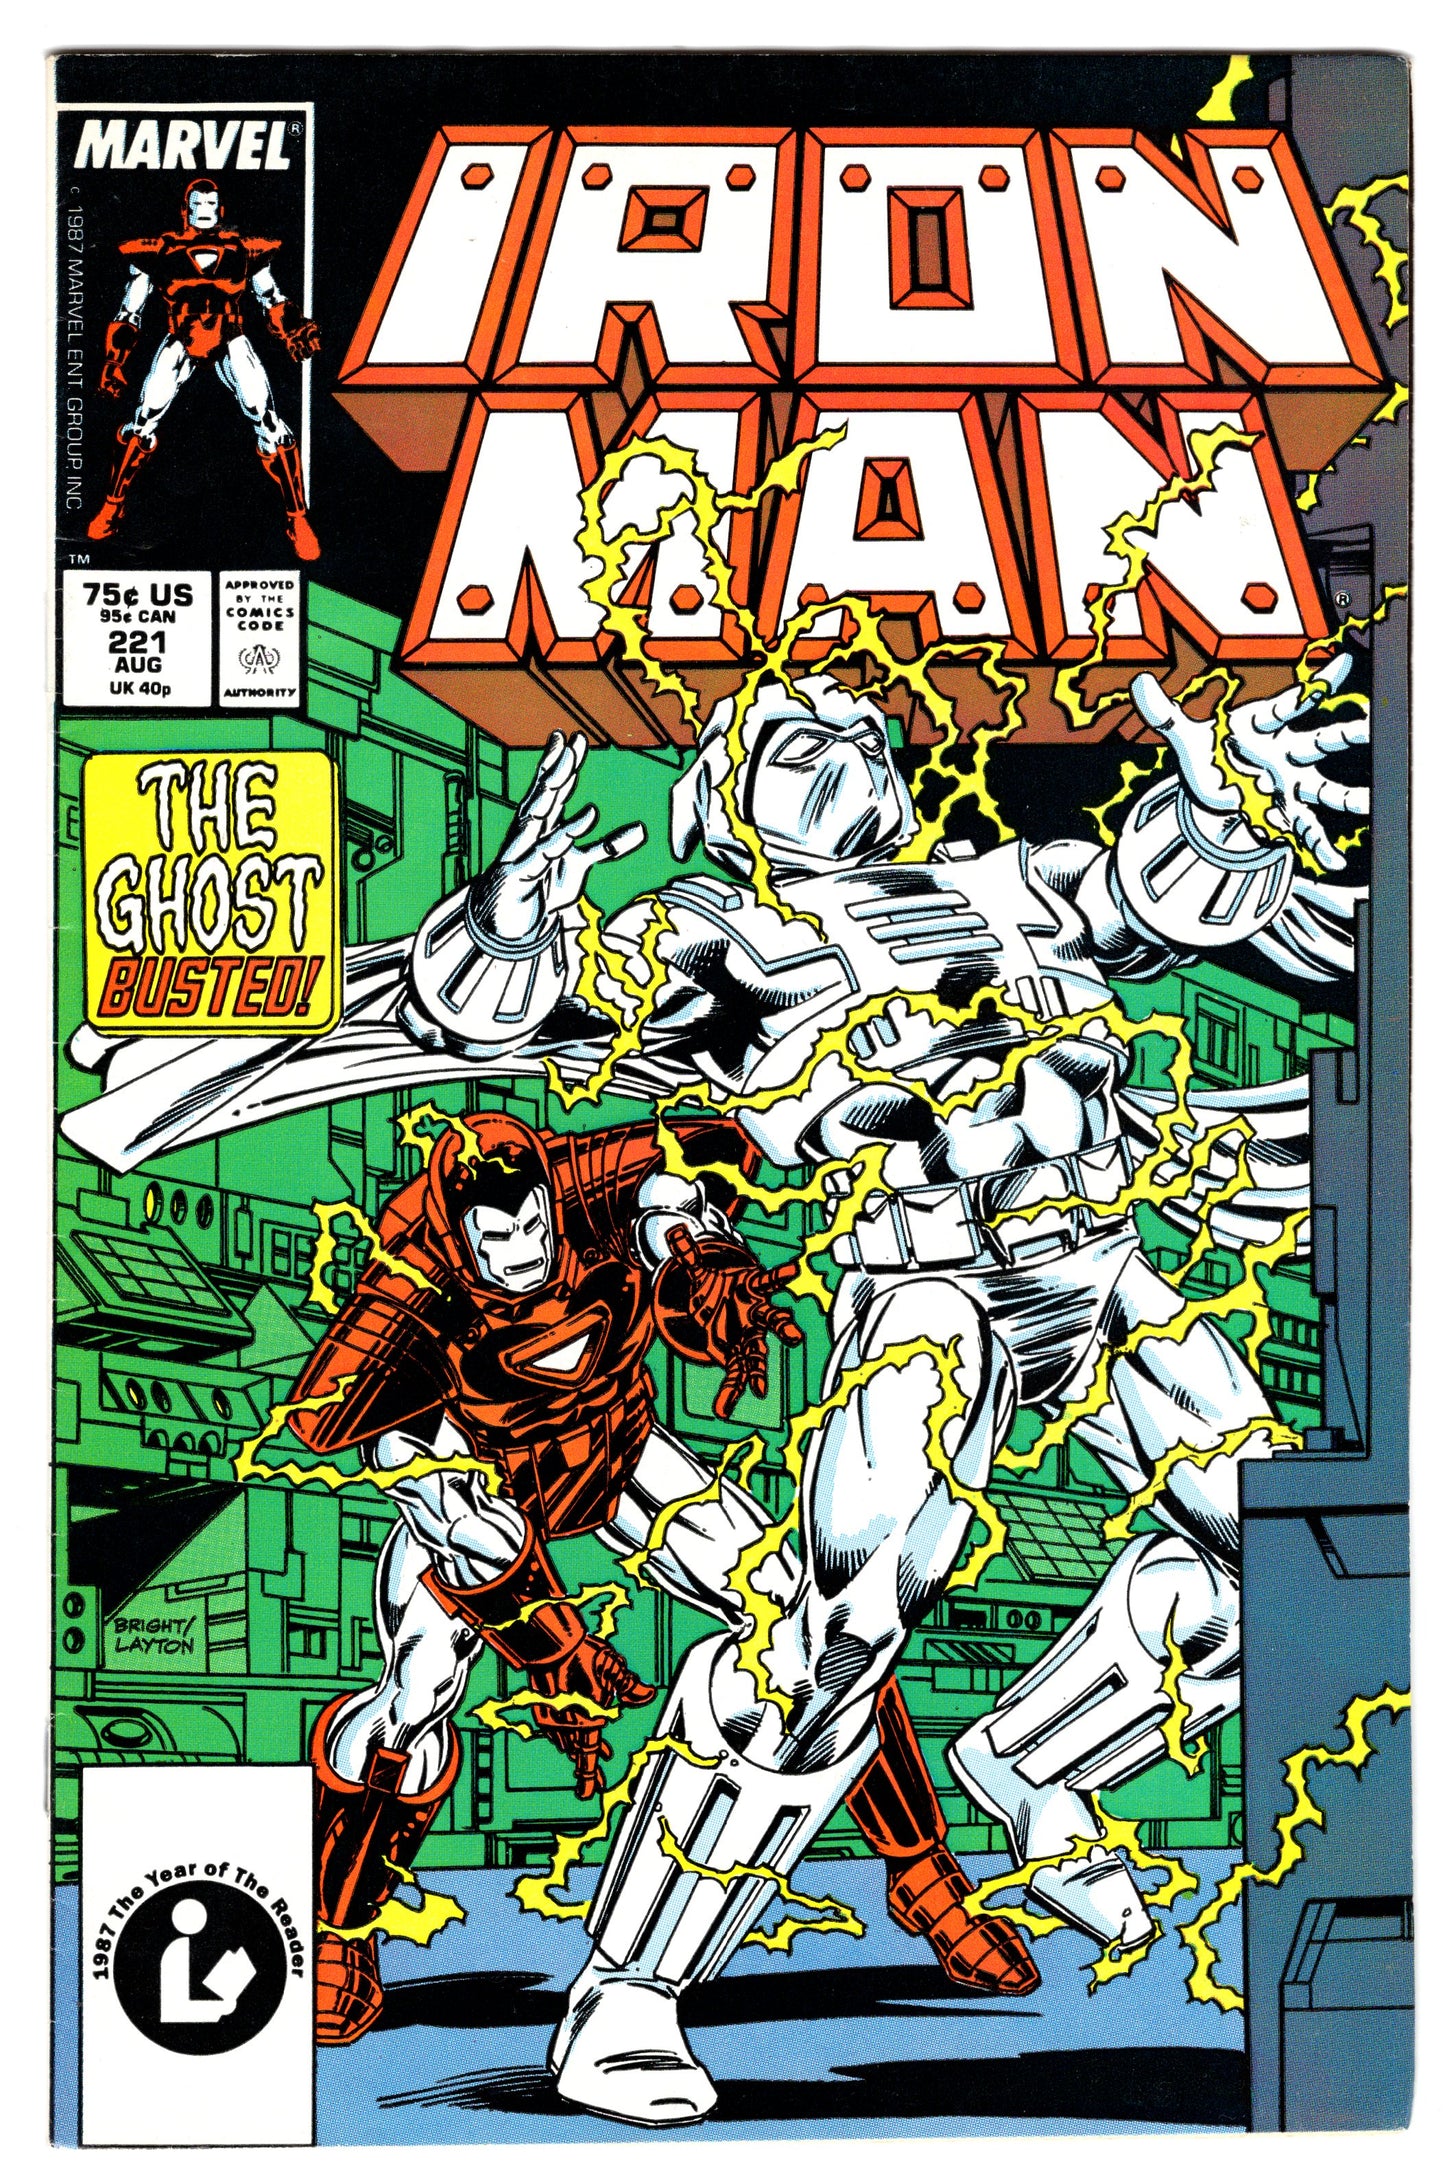 Iron Man Issue #221 "The Ghost Busted" (Aug. 1987 - Marvel Comics) FN+